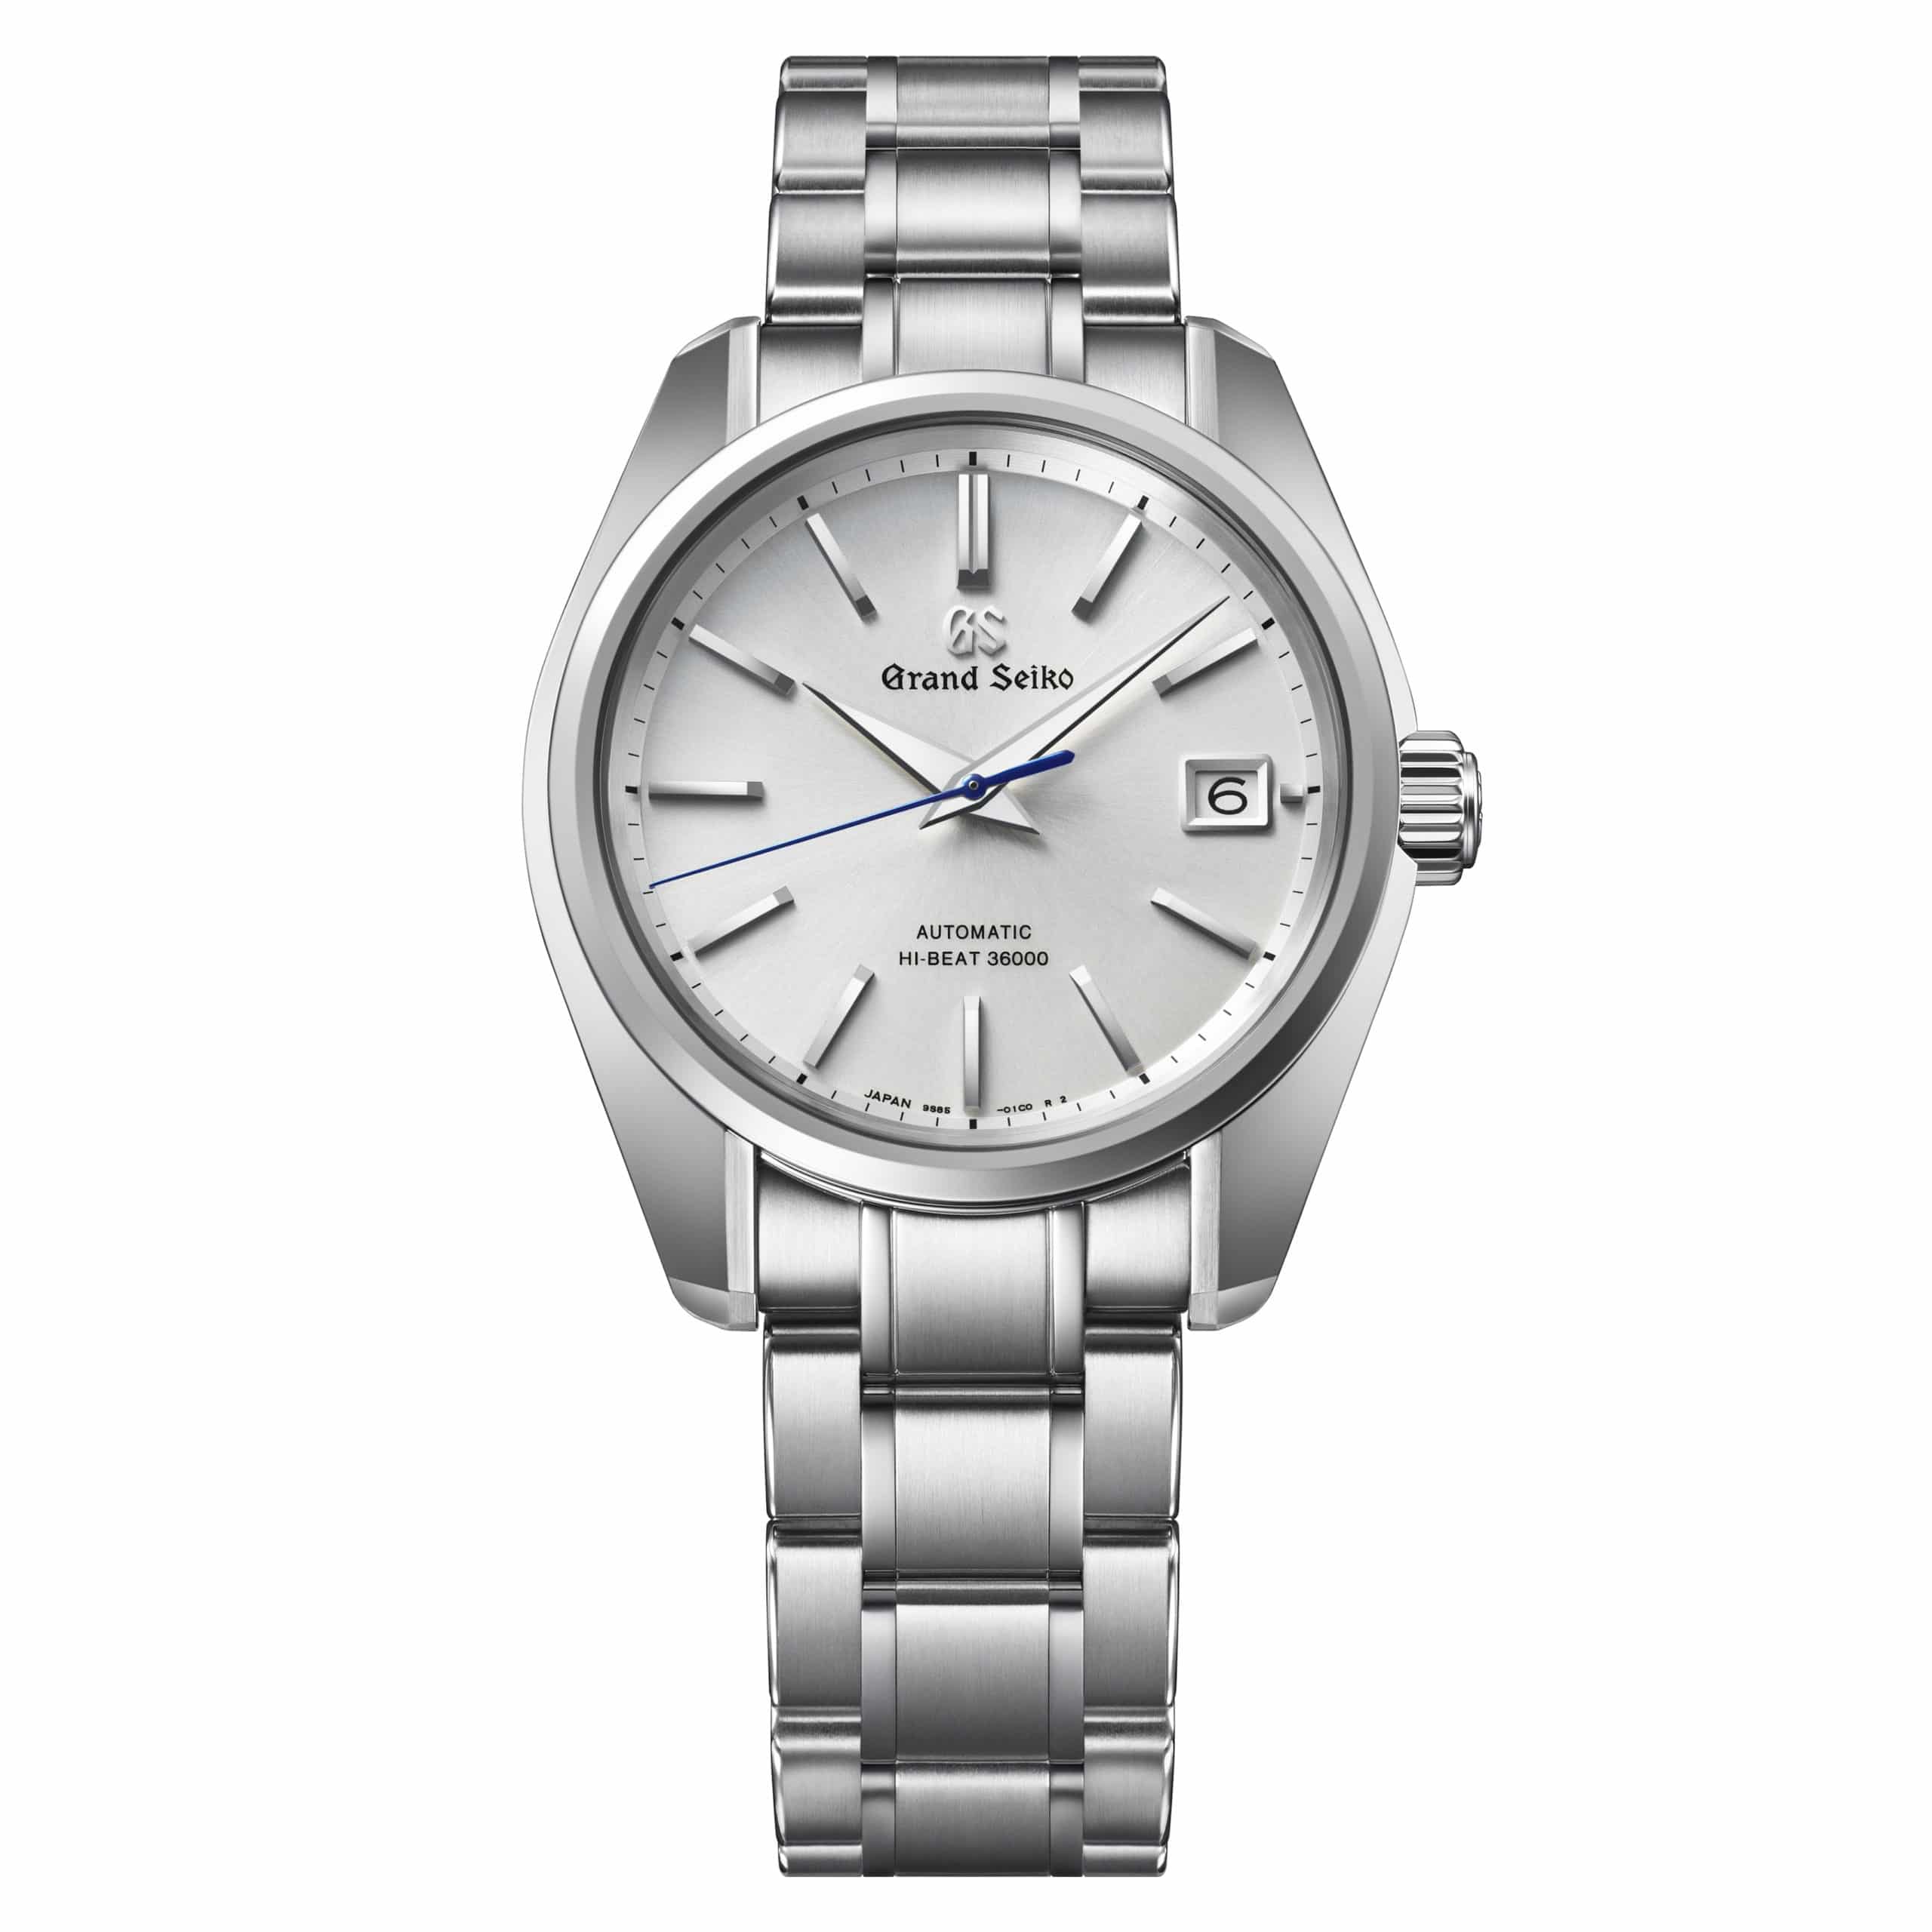 Grand Seiko Heritage Collection White Dial Watch 40mm | Harley's Time LLC